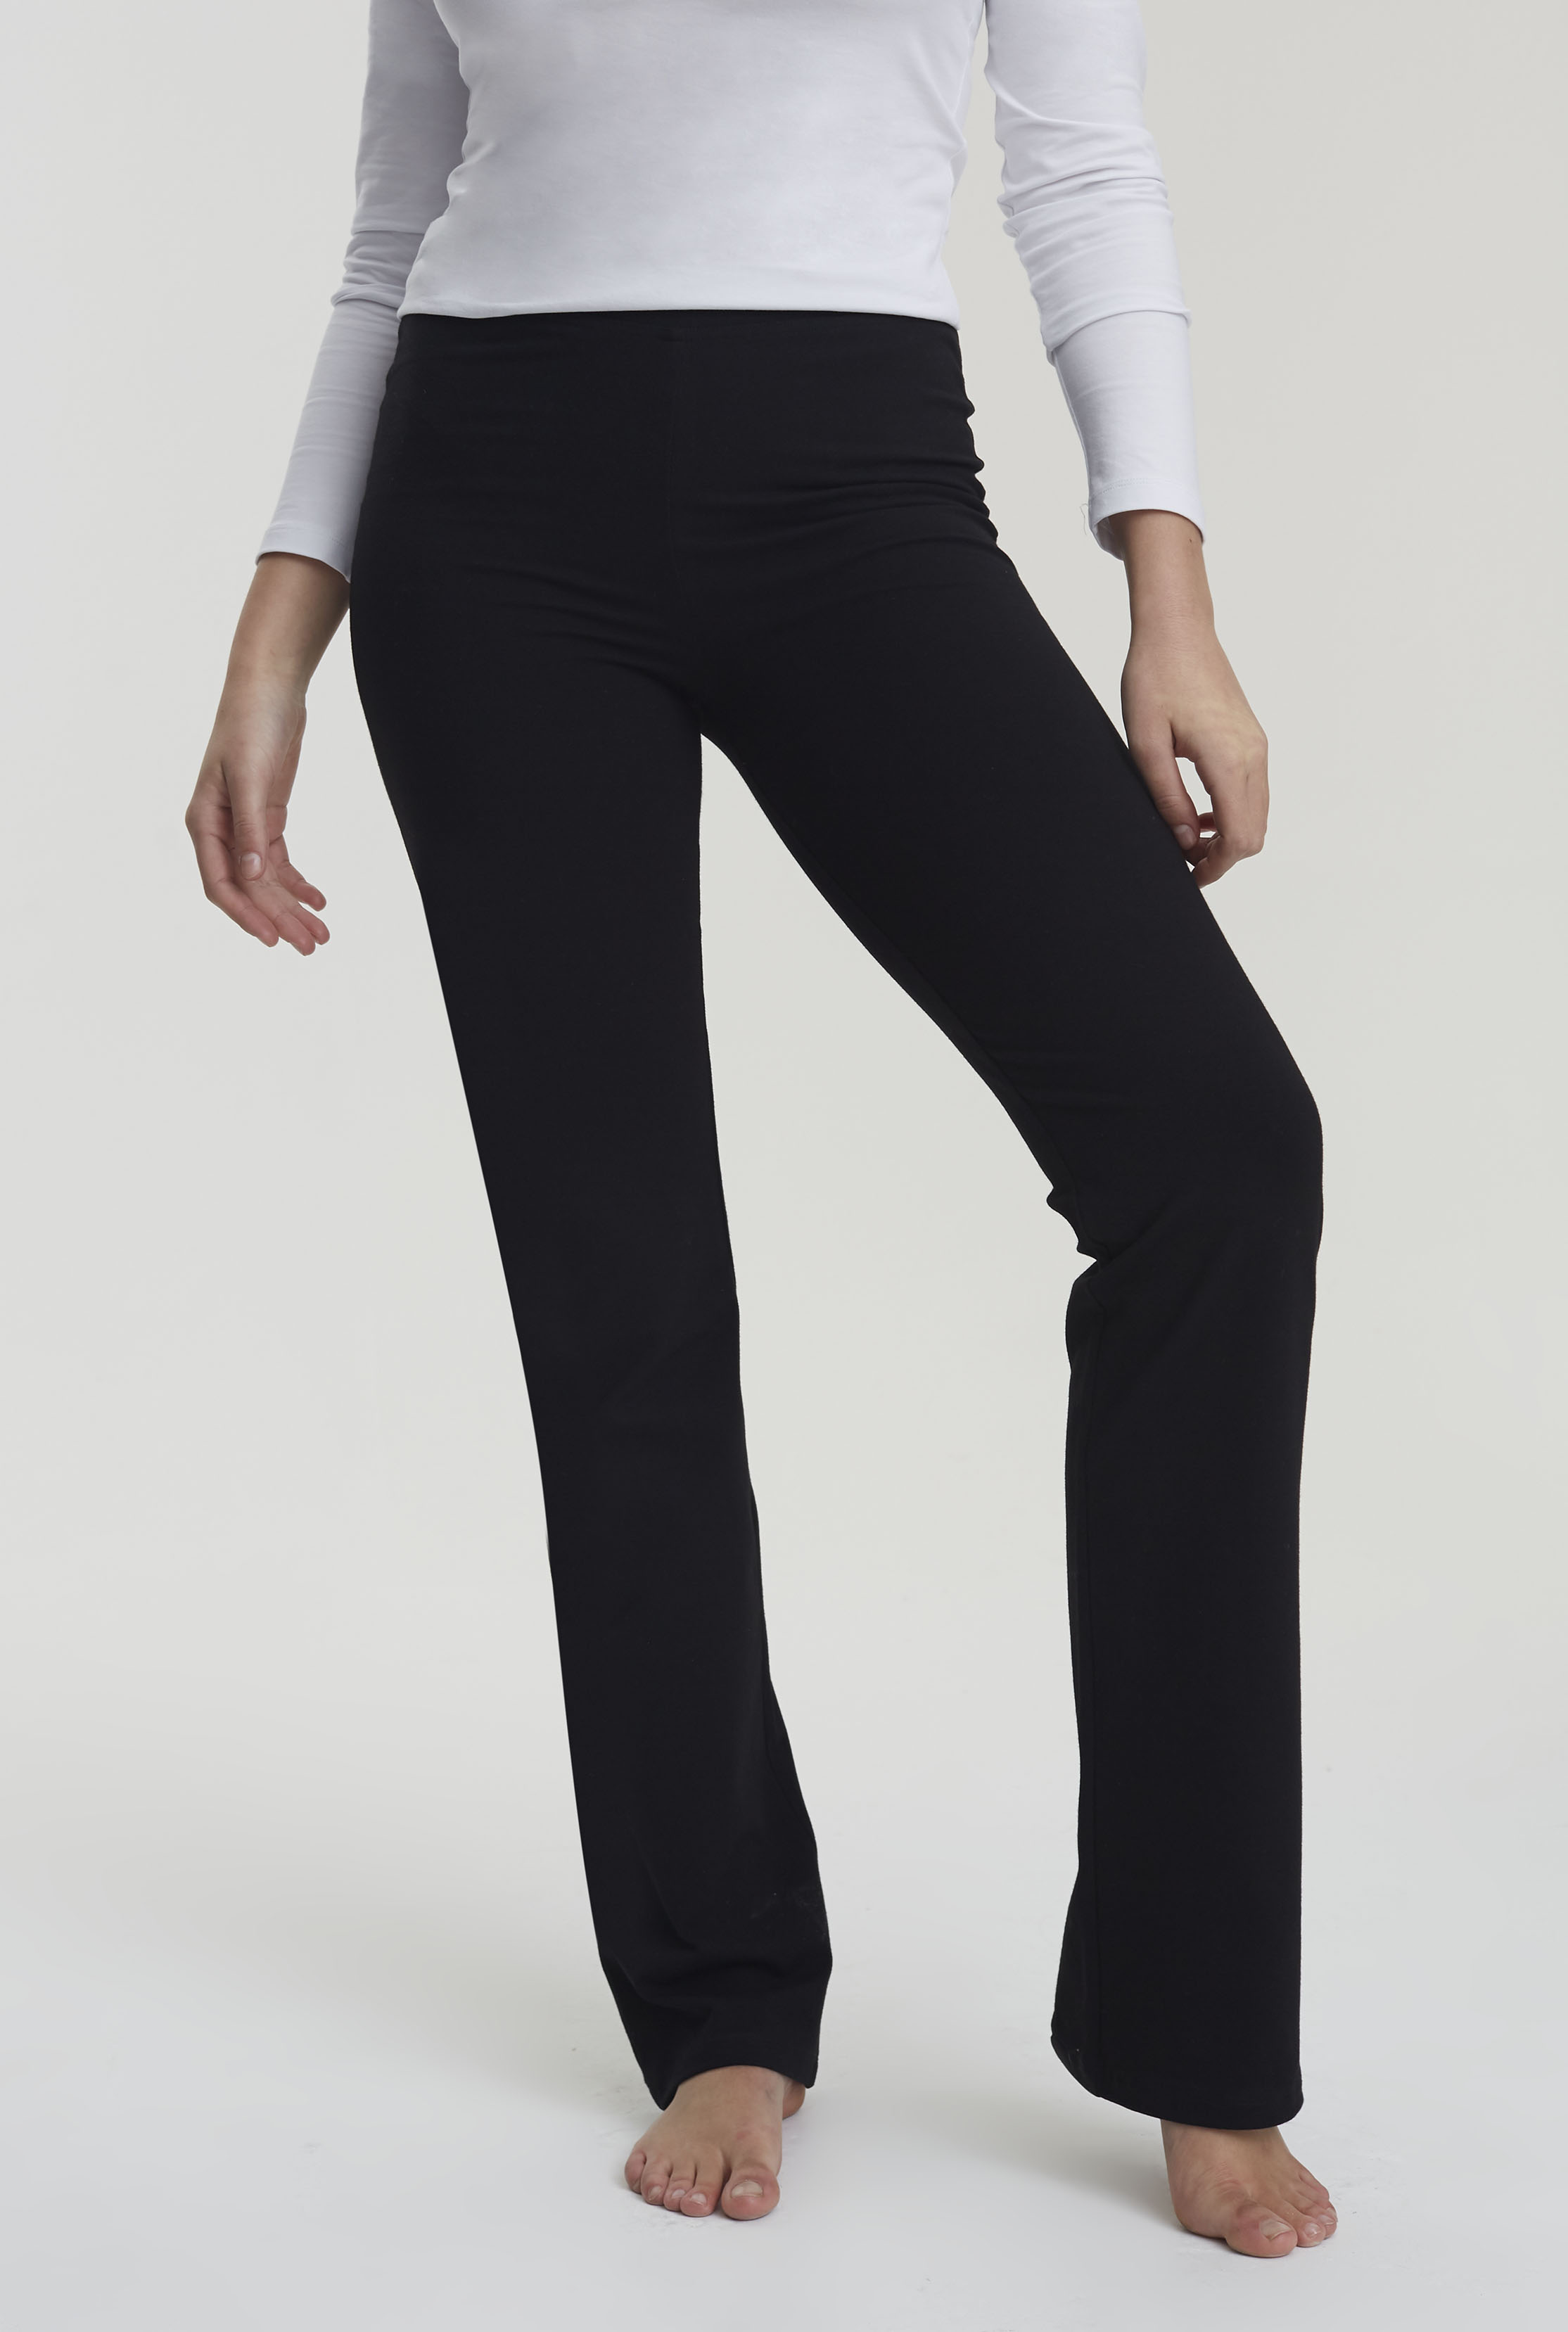 Best Black Yoga Pants With Pockets